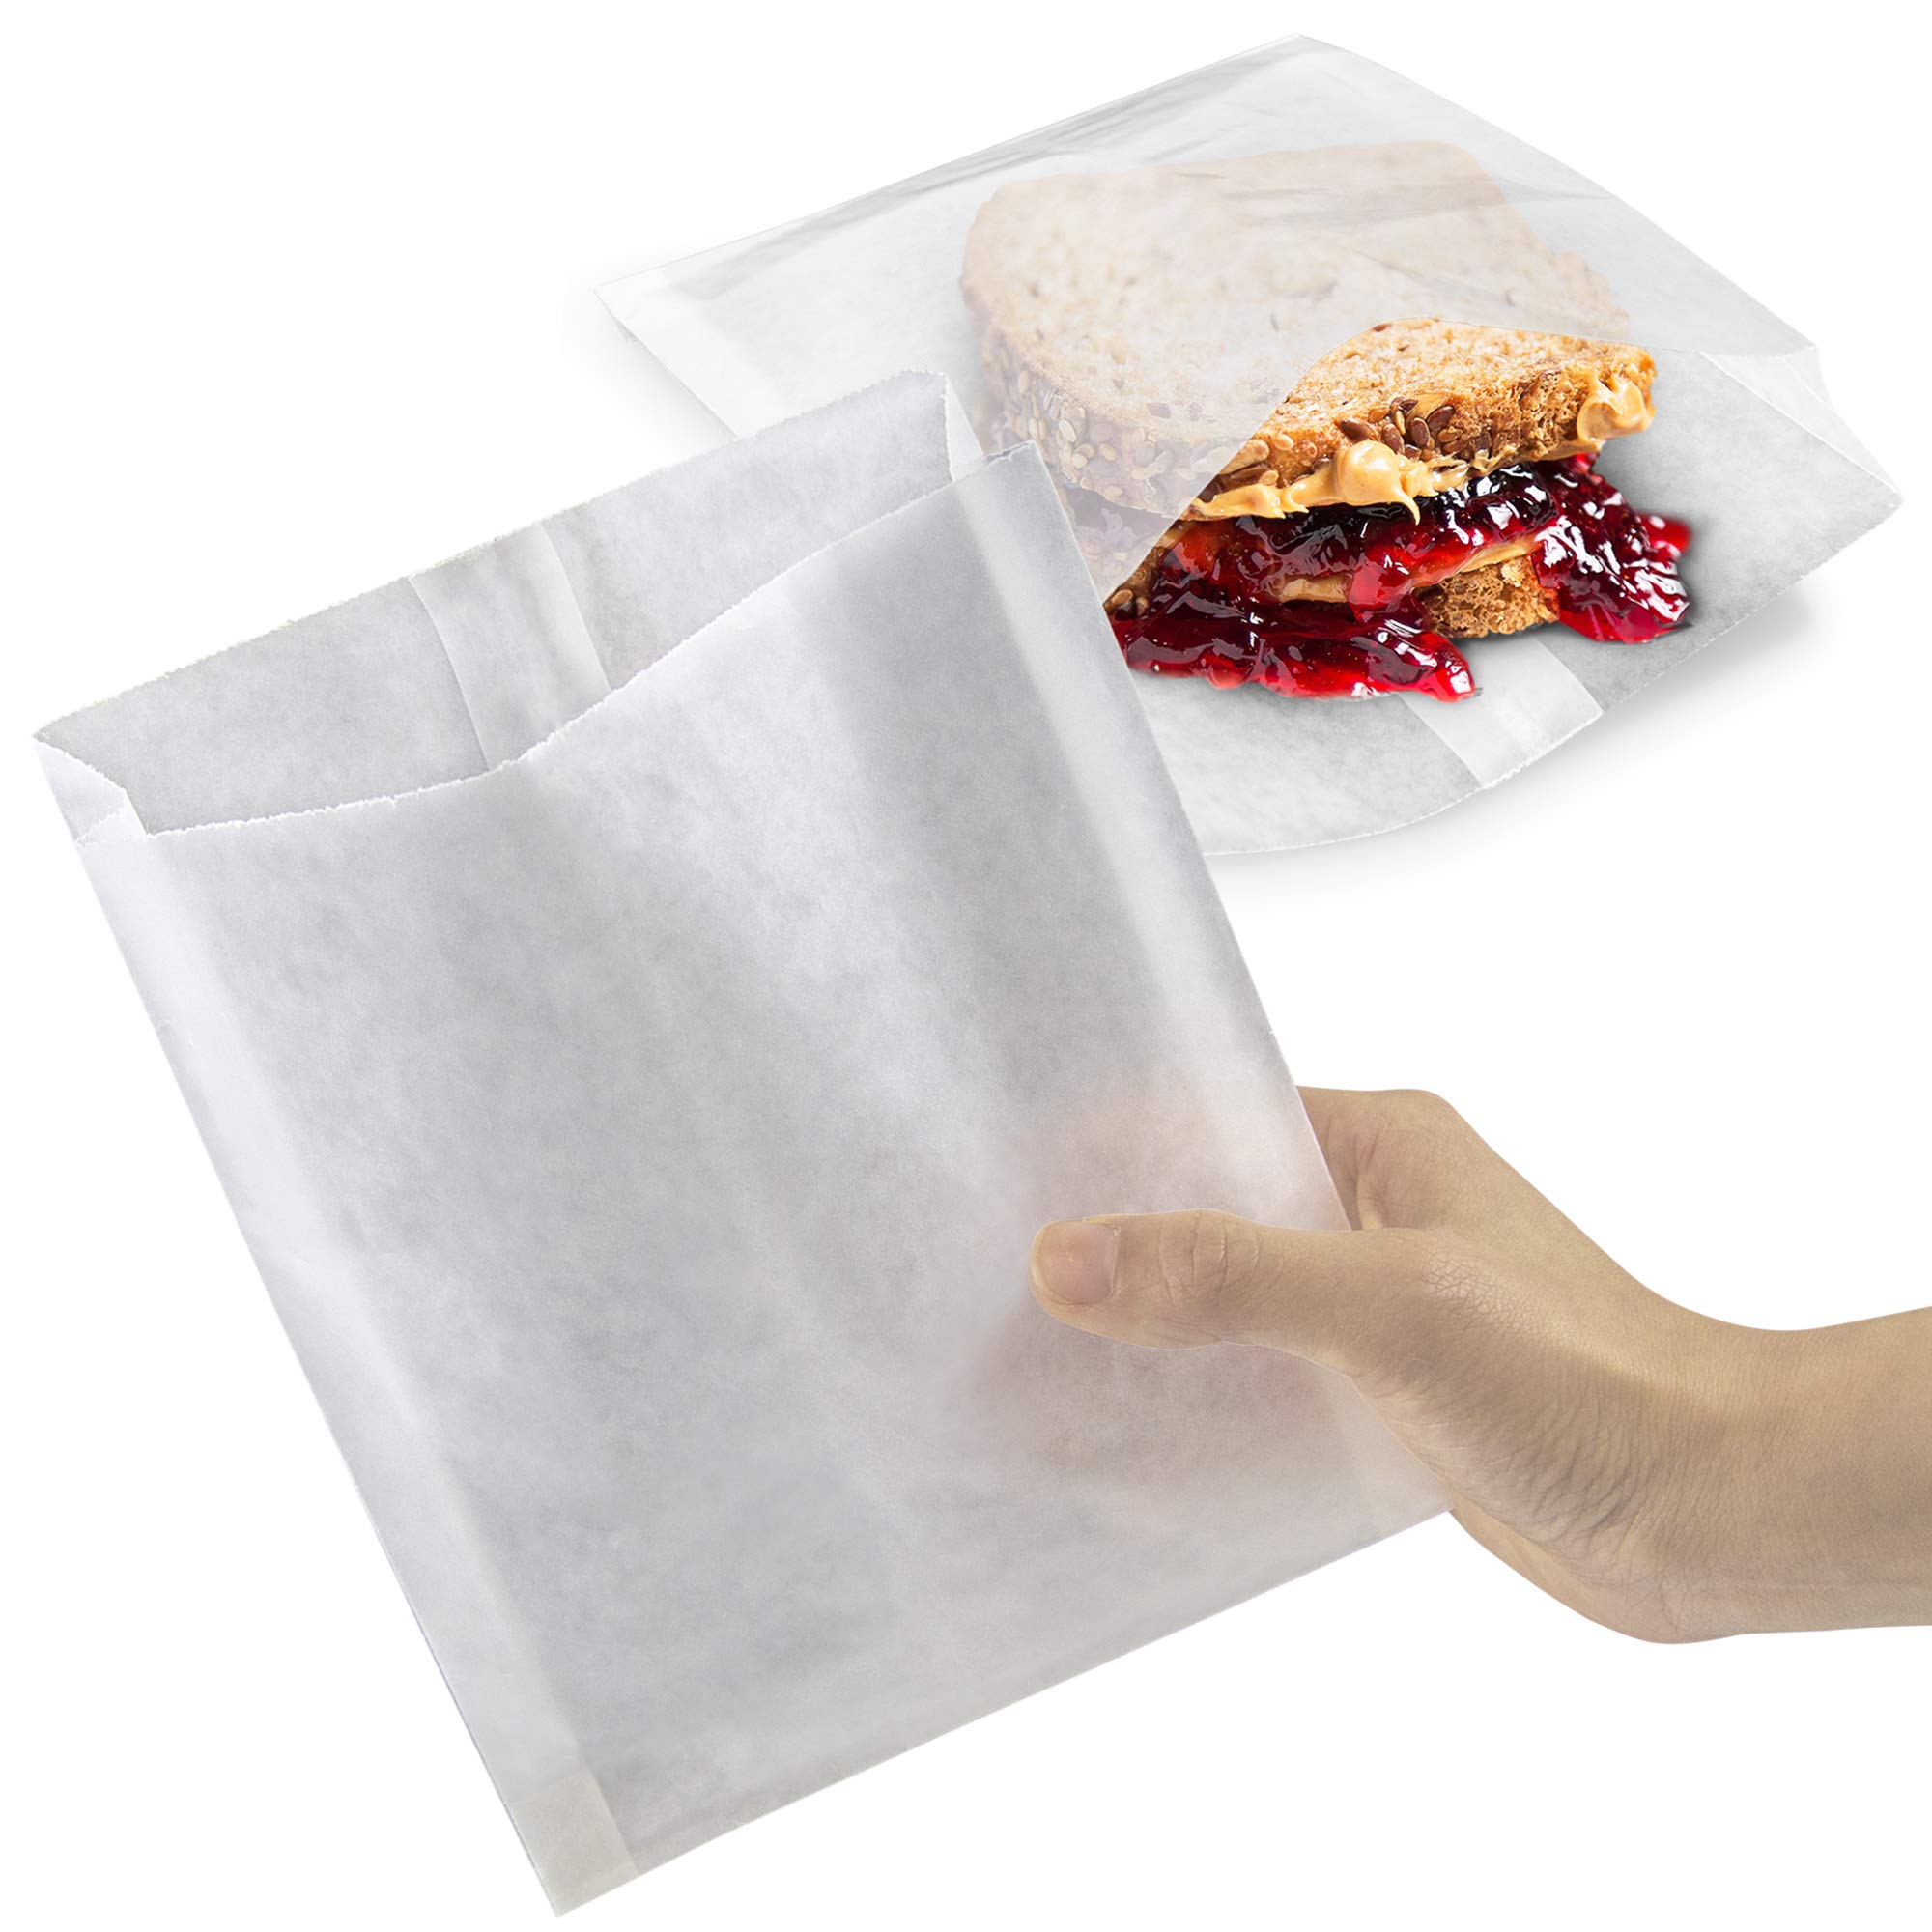 Grease-proof Wax Paper Bags for Sandwich and Snack